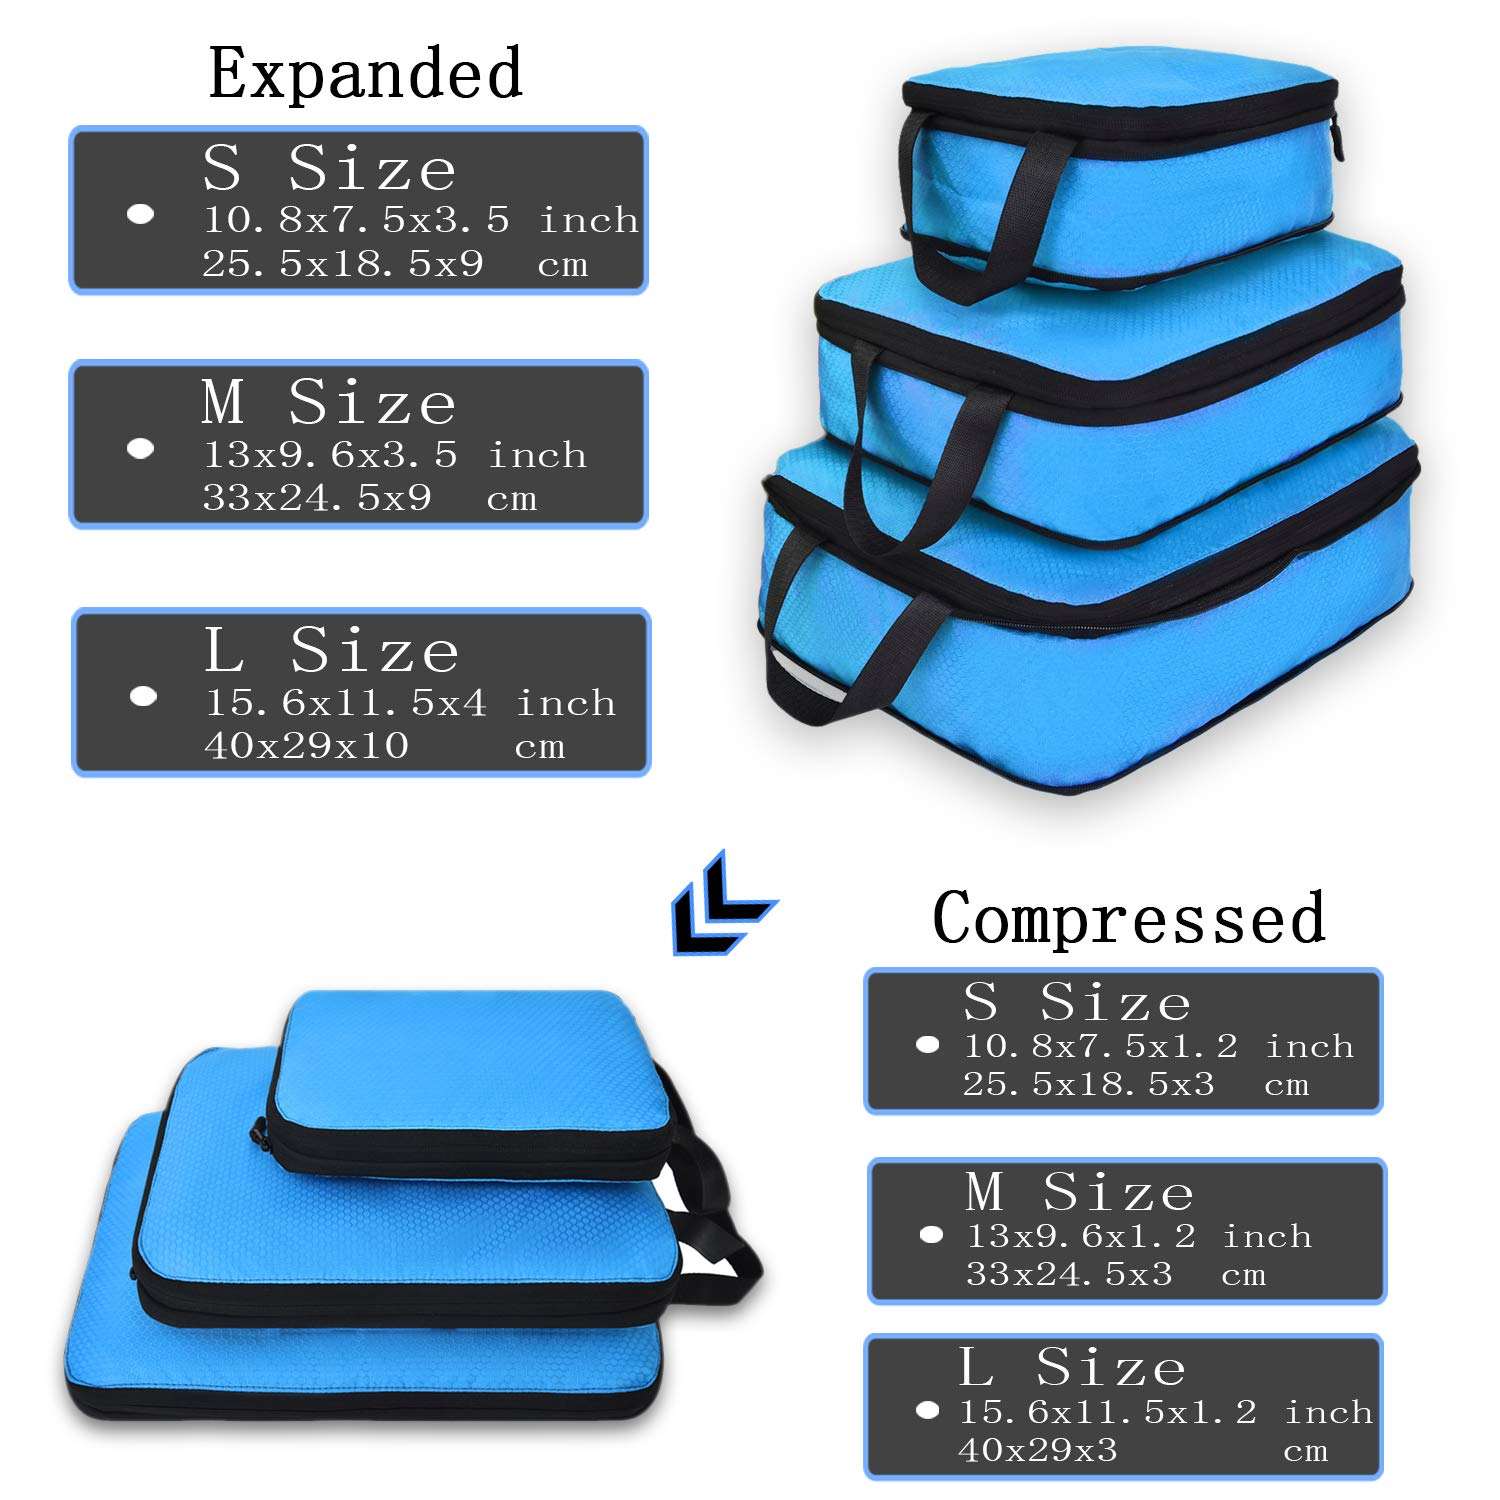 Travel Luggage Packing Organizers Product Details